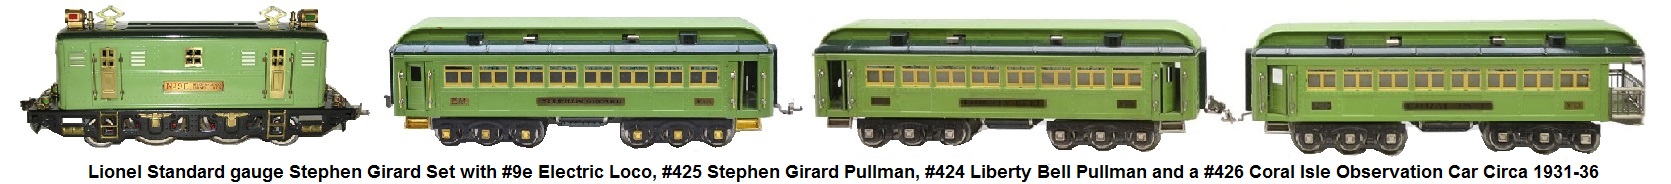 Lionel Standard gauge Stephen Girard Set from 1931-36 with #9e Electric loco, #425 Stephen Girard Pullman, #424 Liberty Bell Pullman and a #426 Coral Isle observation